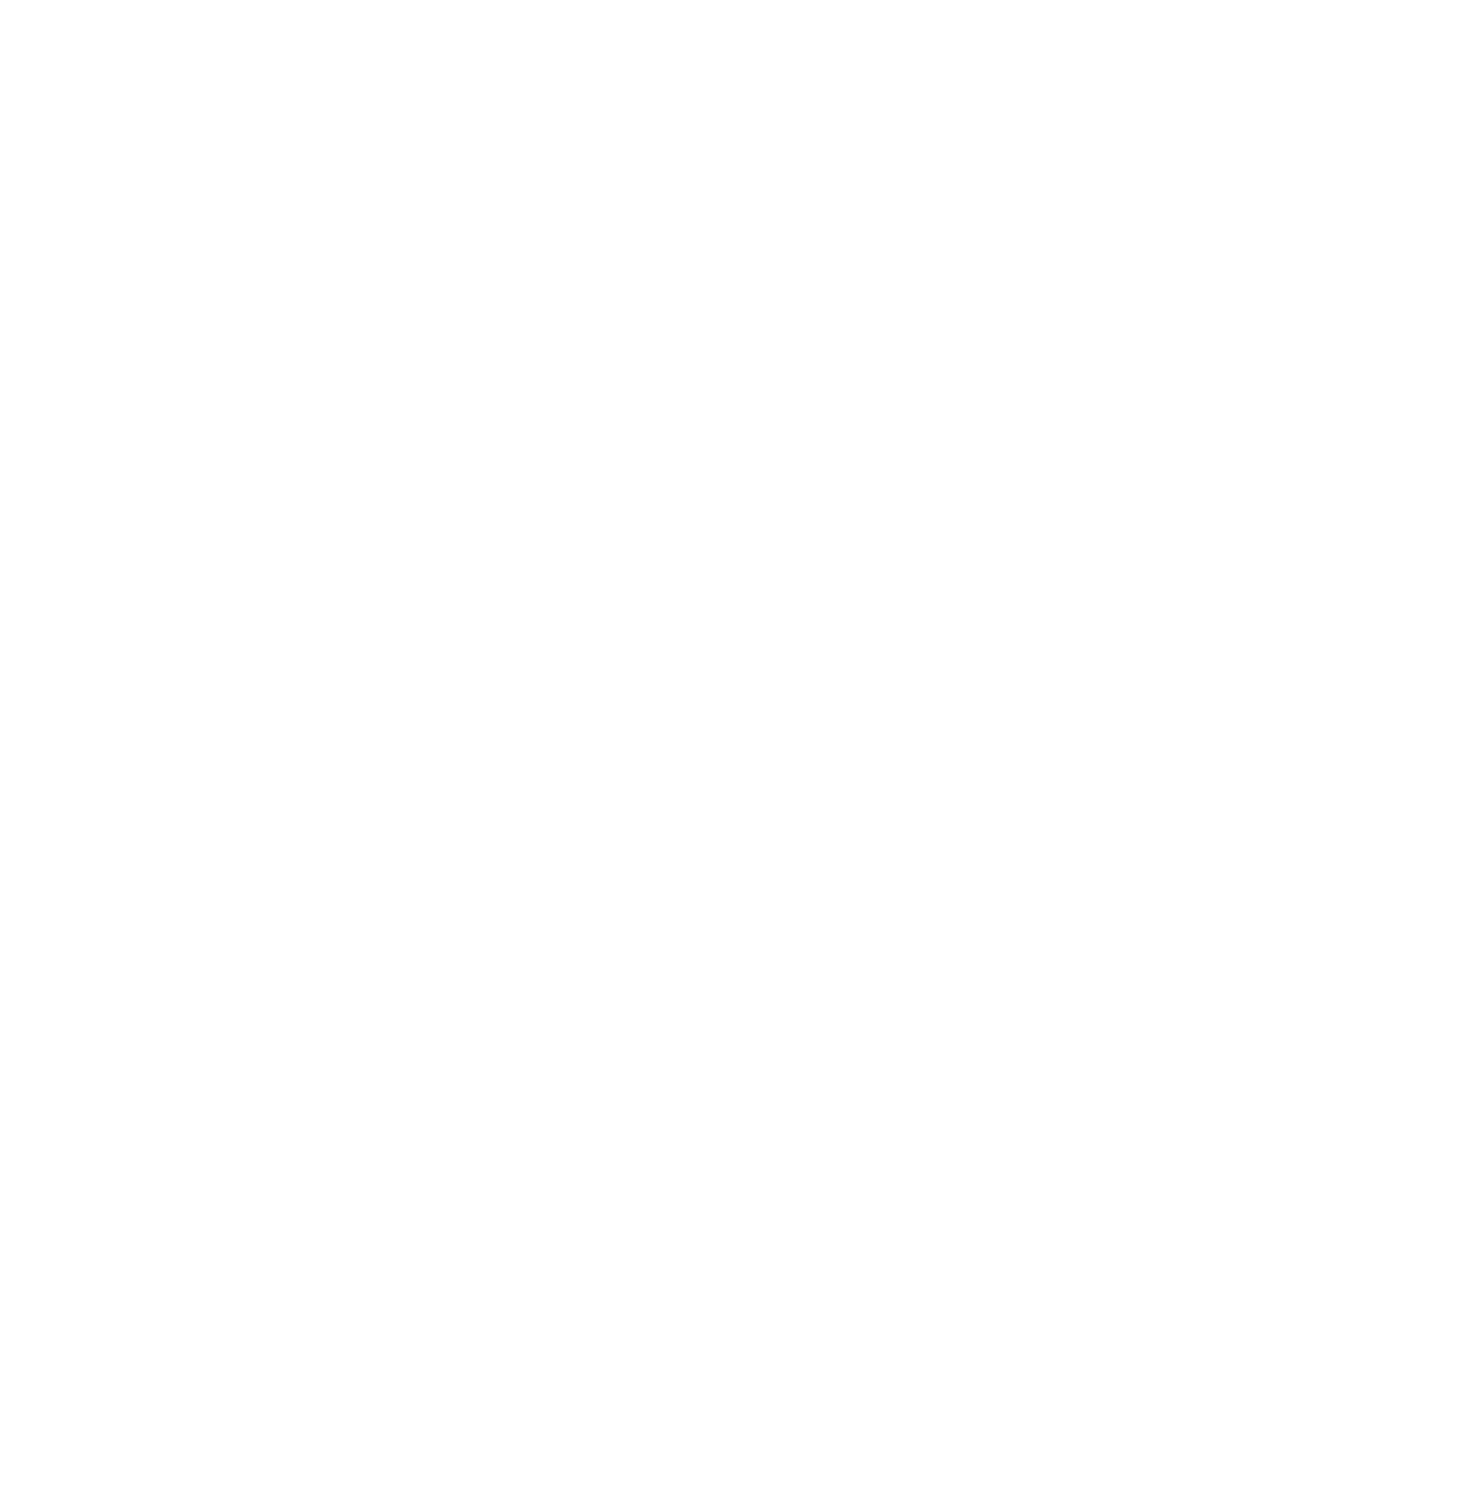 The Oncology Institute logo for dark backgrounds (transparent PNG)